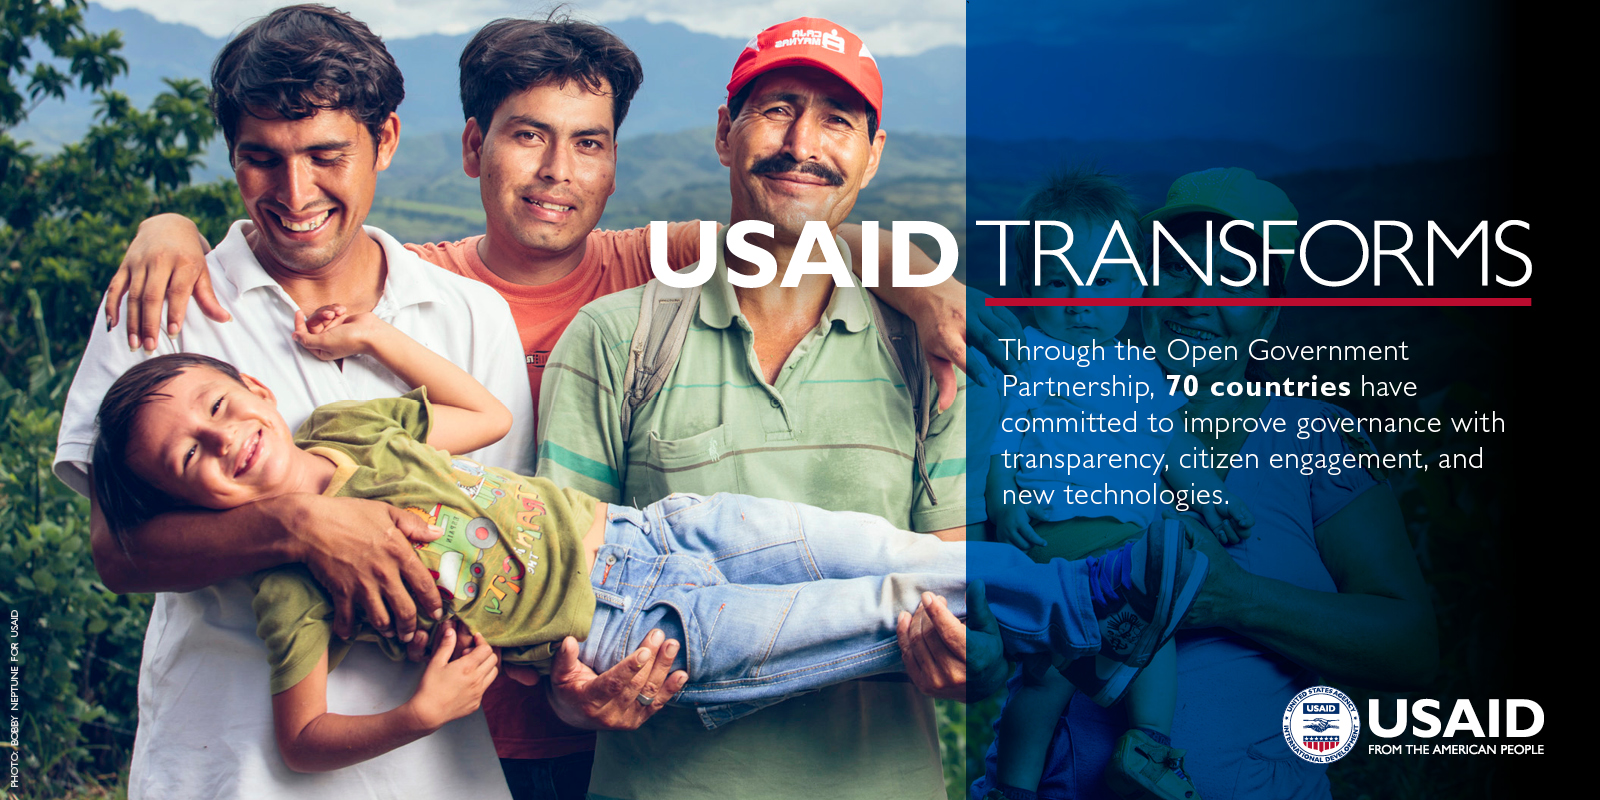 USAID Transforms: Through the Open Government Partnership, 70 countries have committed to improve governance with transparency, citizen engagement, and new technologies. Photo: Bobby Neptune for USAID.